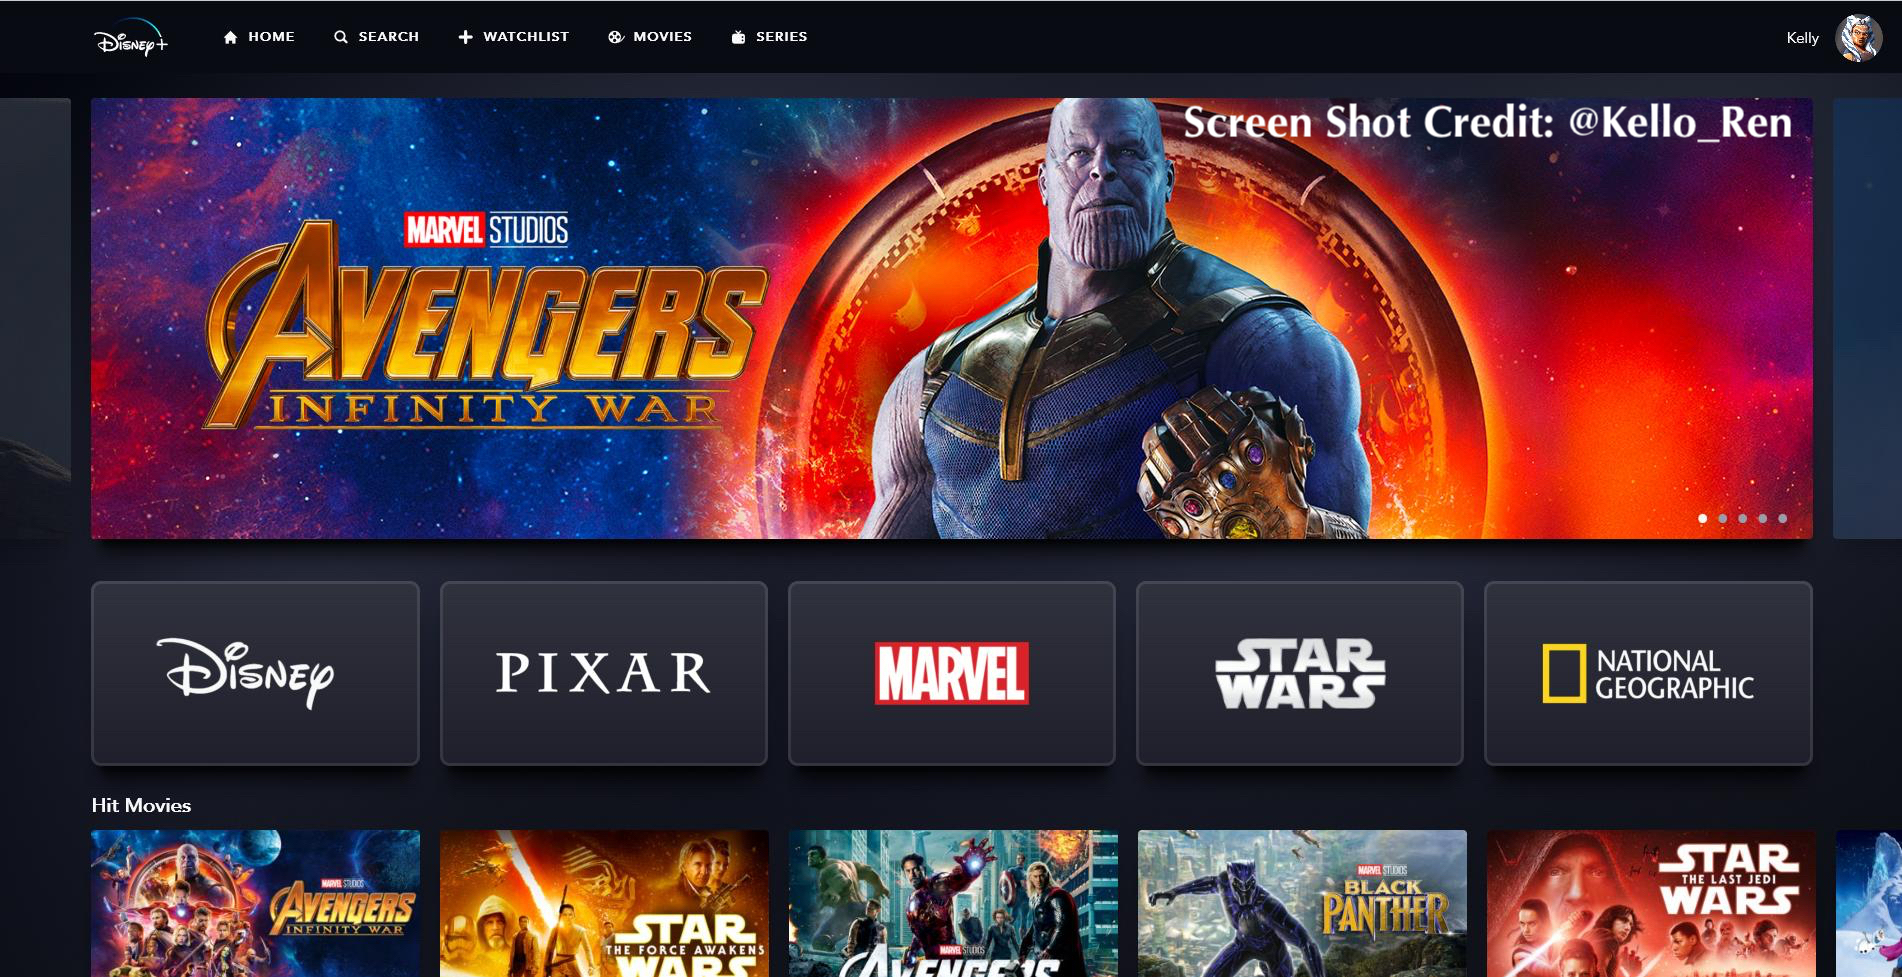 Star Wars And Marvel Content Is Most Watched Among Disney+ Trial Users, Led By Avengers: Infinity War [HOT]